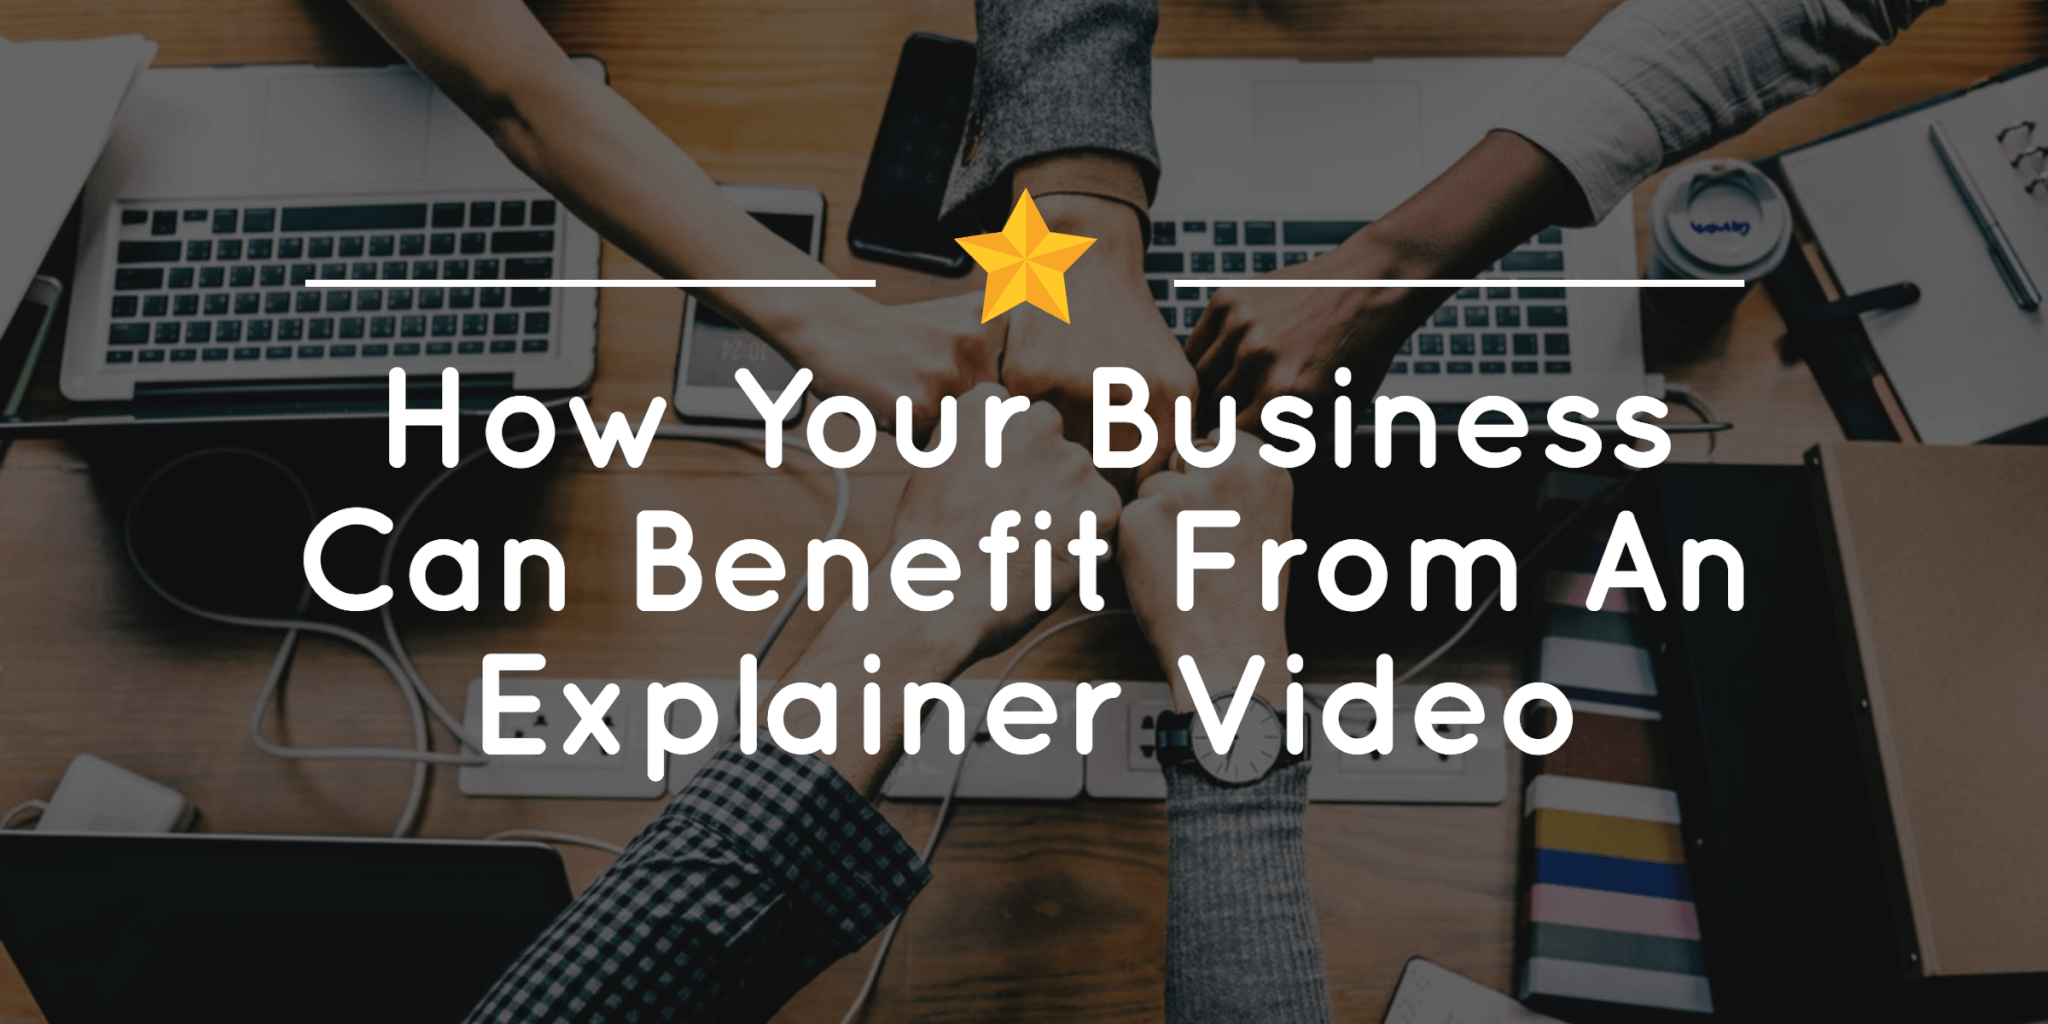 Explainer Videos Benefits - How Videos Help You Zoom Past The Competition